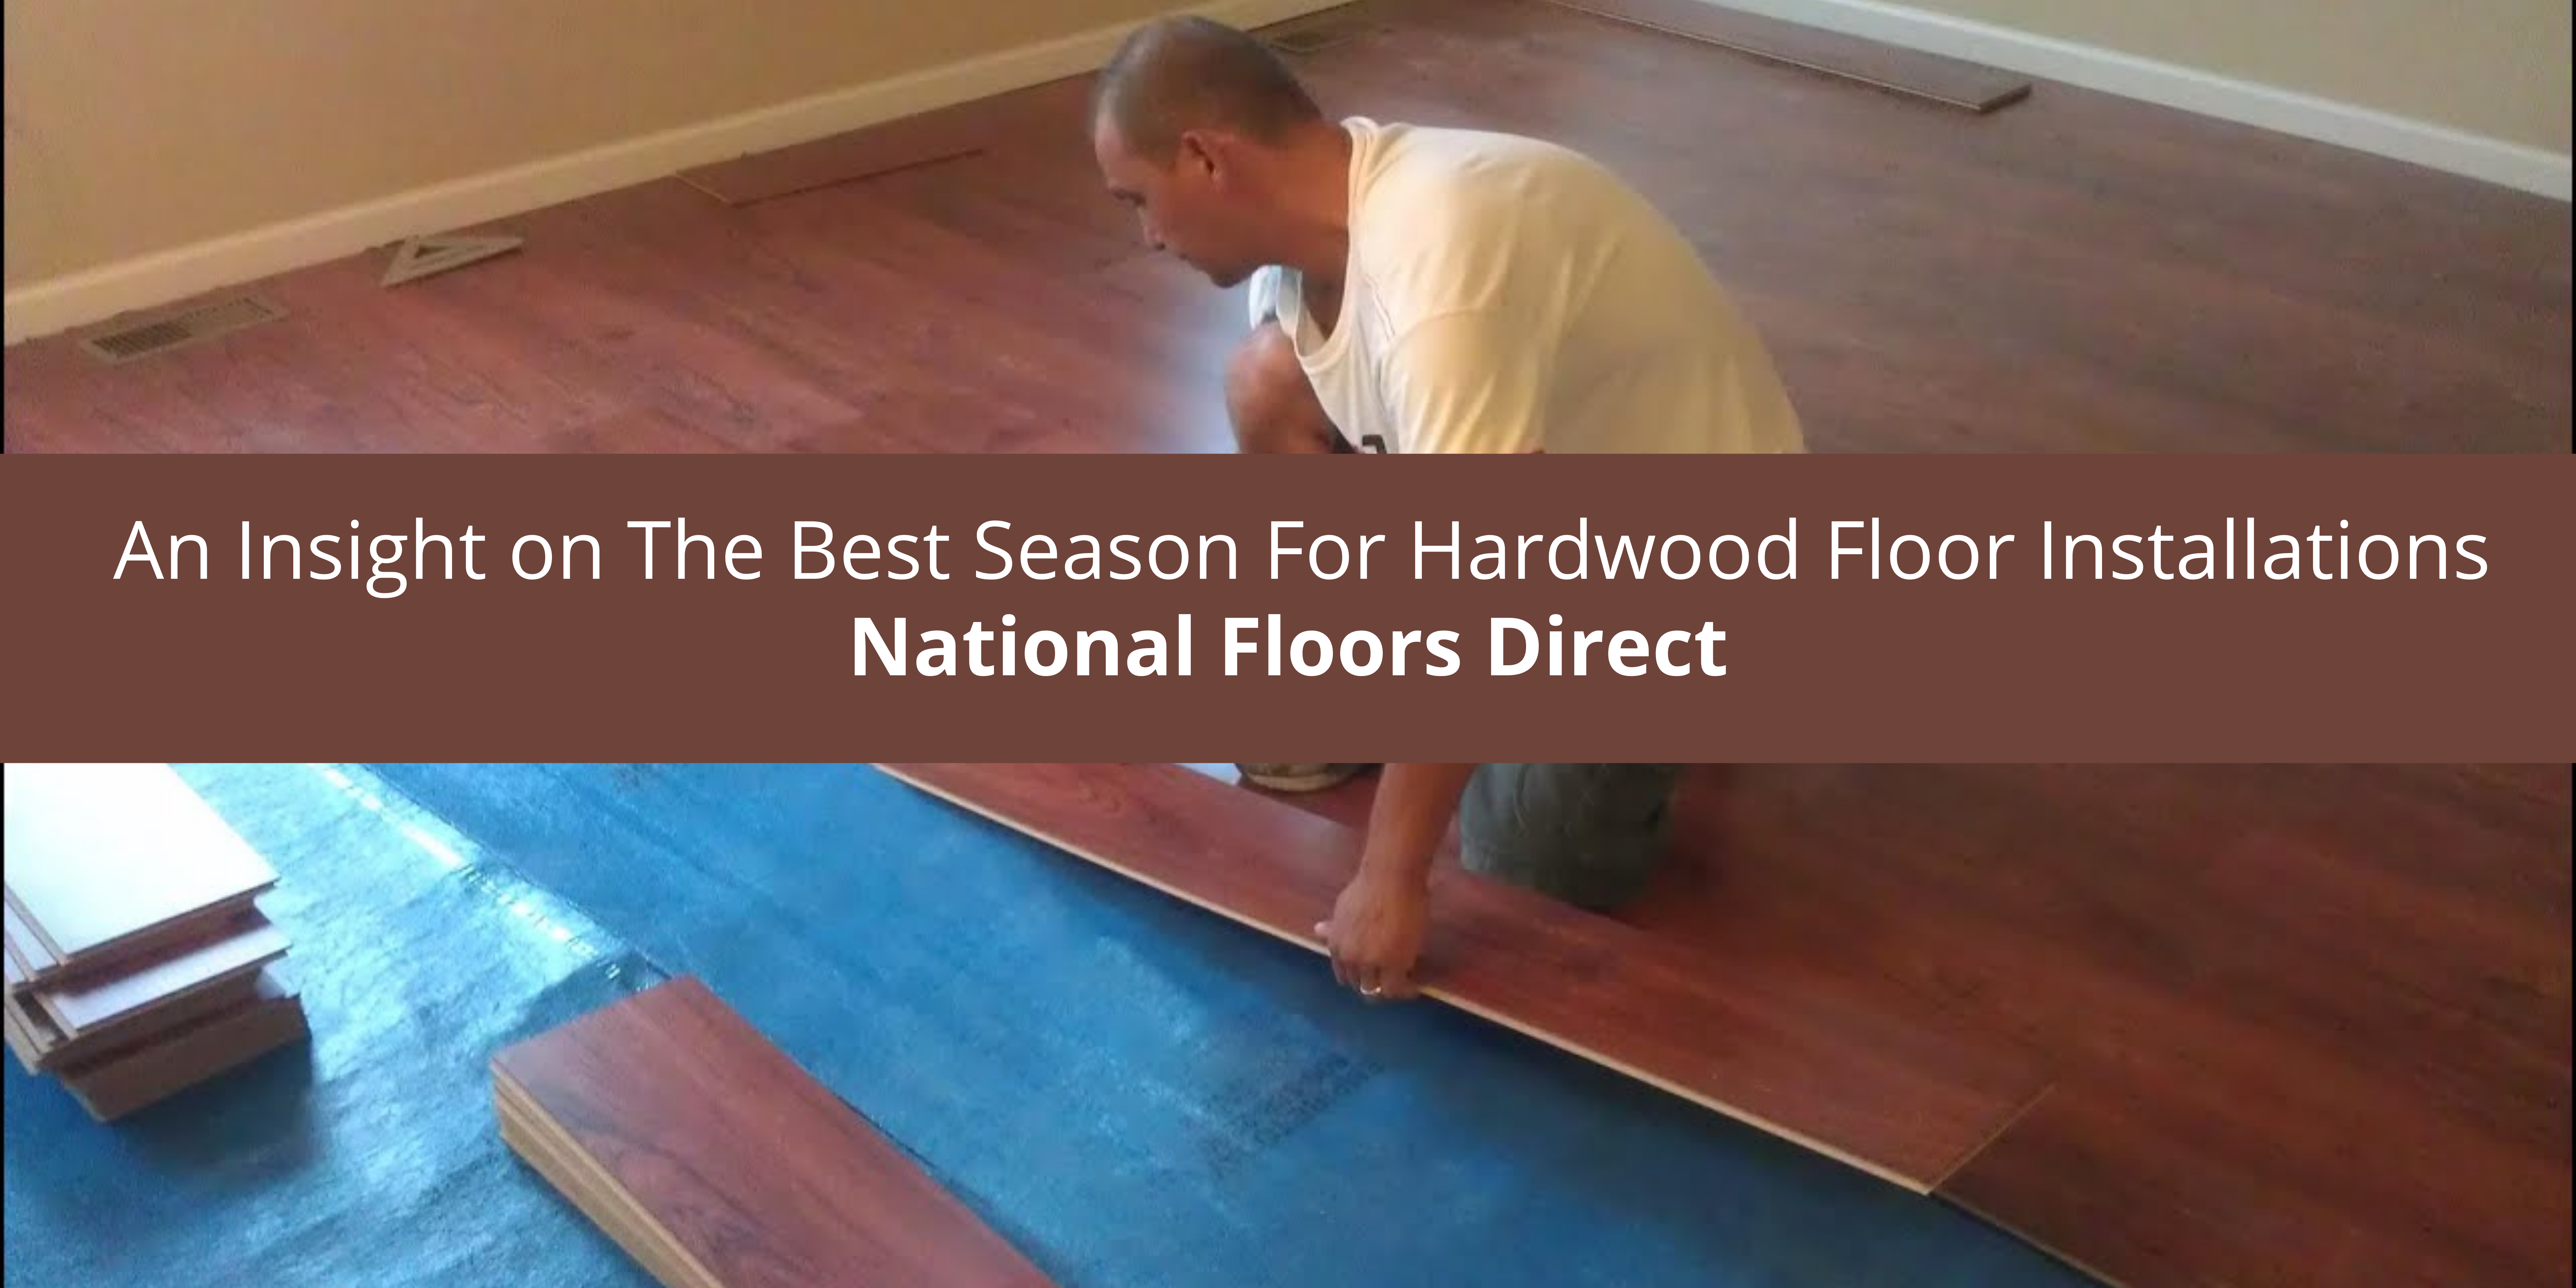 National Floors Direct Offers An Insight on The Best Season For Hardwoo